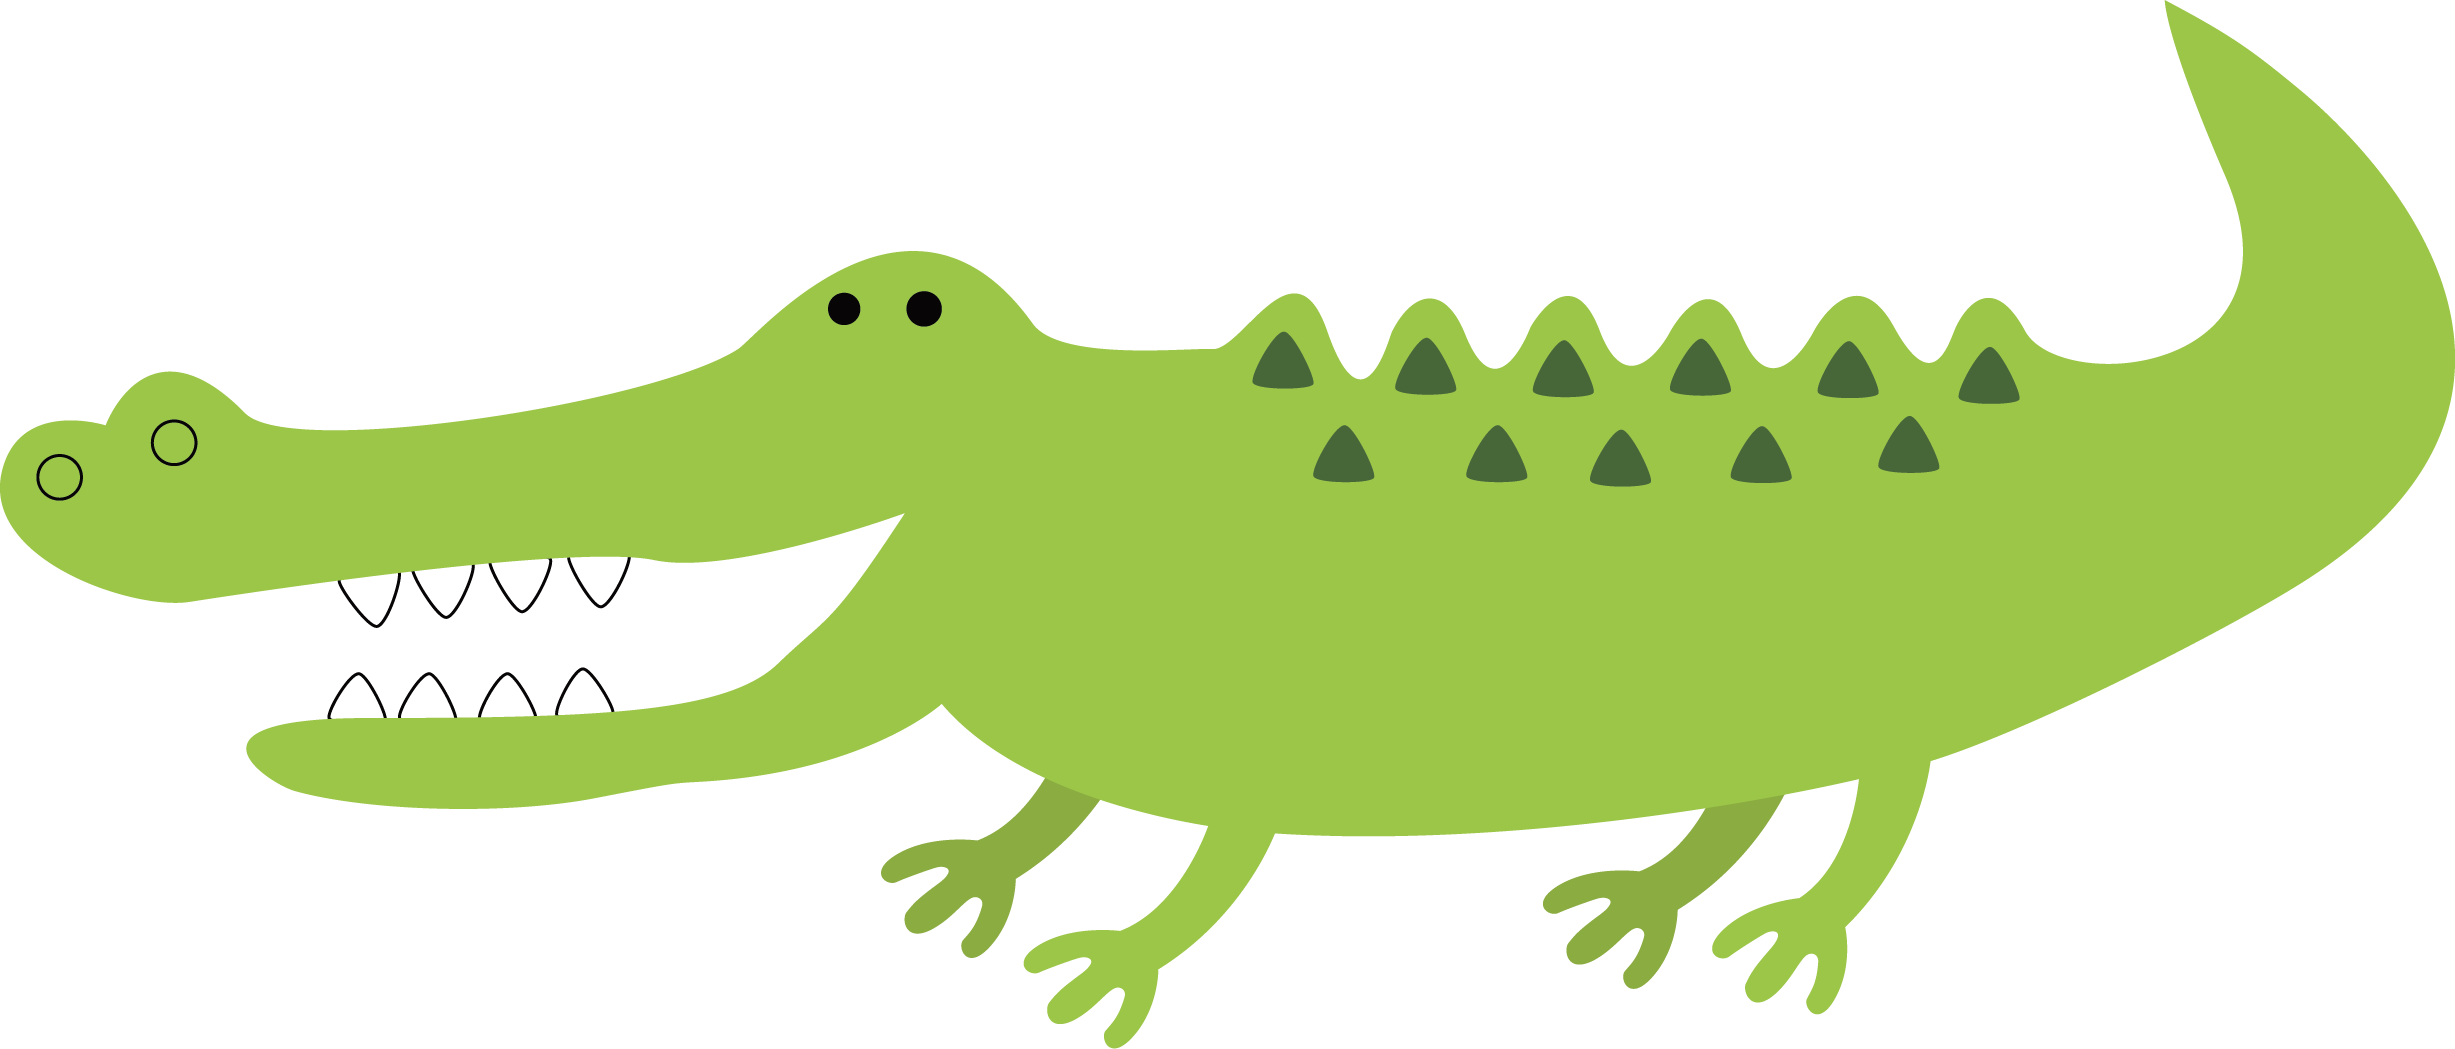 A Green Alligator With Black Background